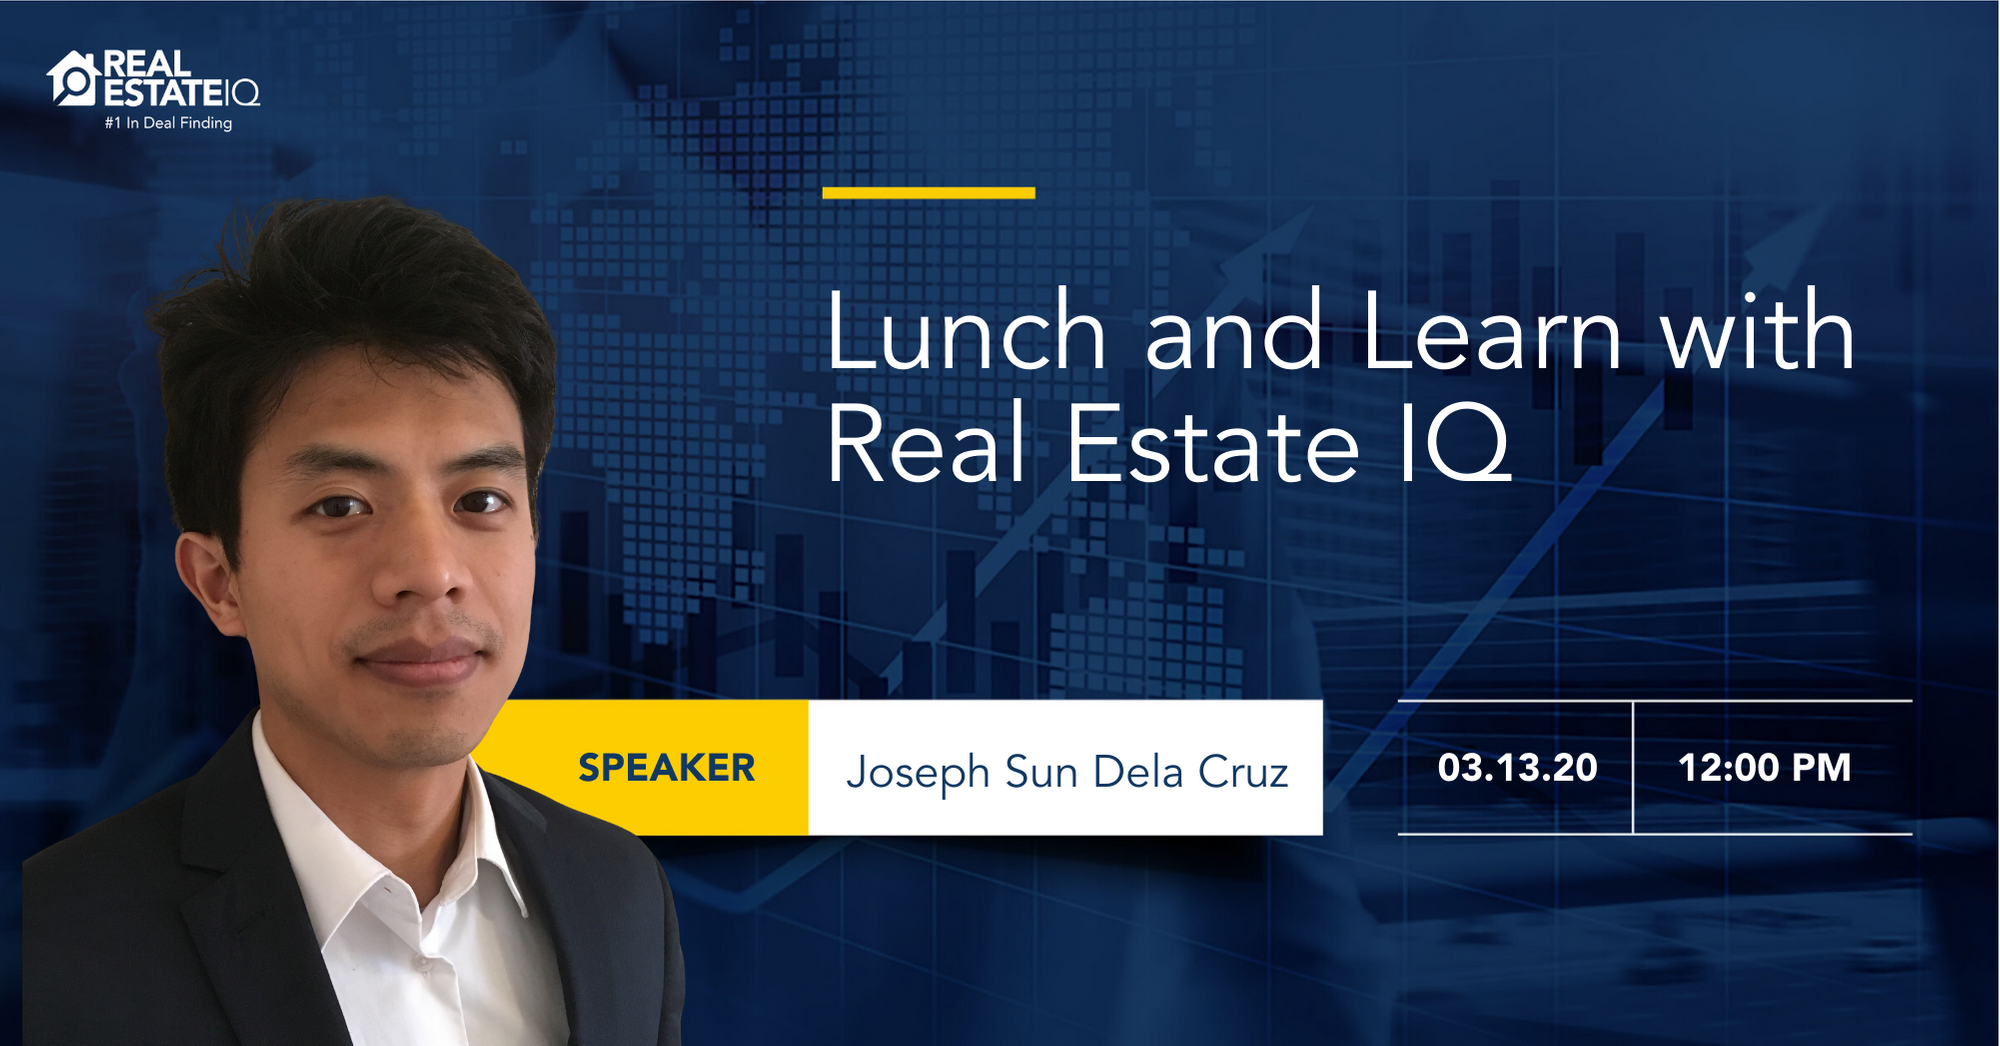 San Antonio - Lunch and learn with Real Estate IQ